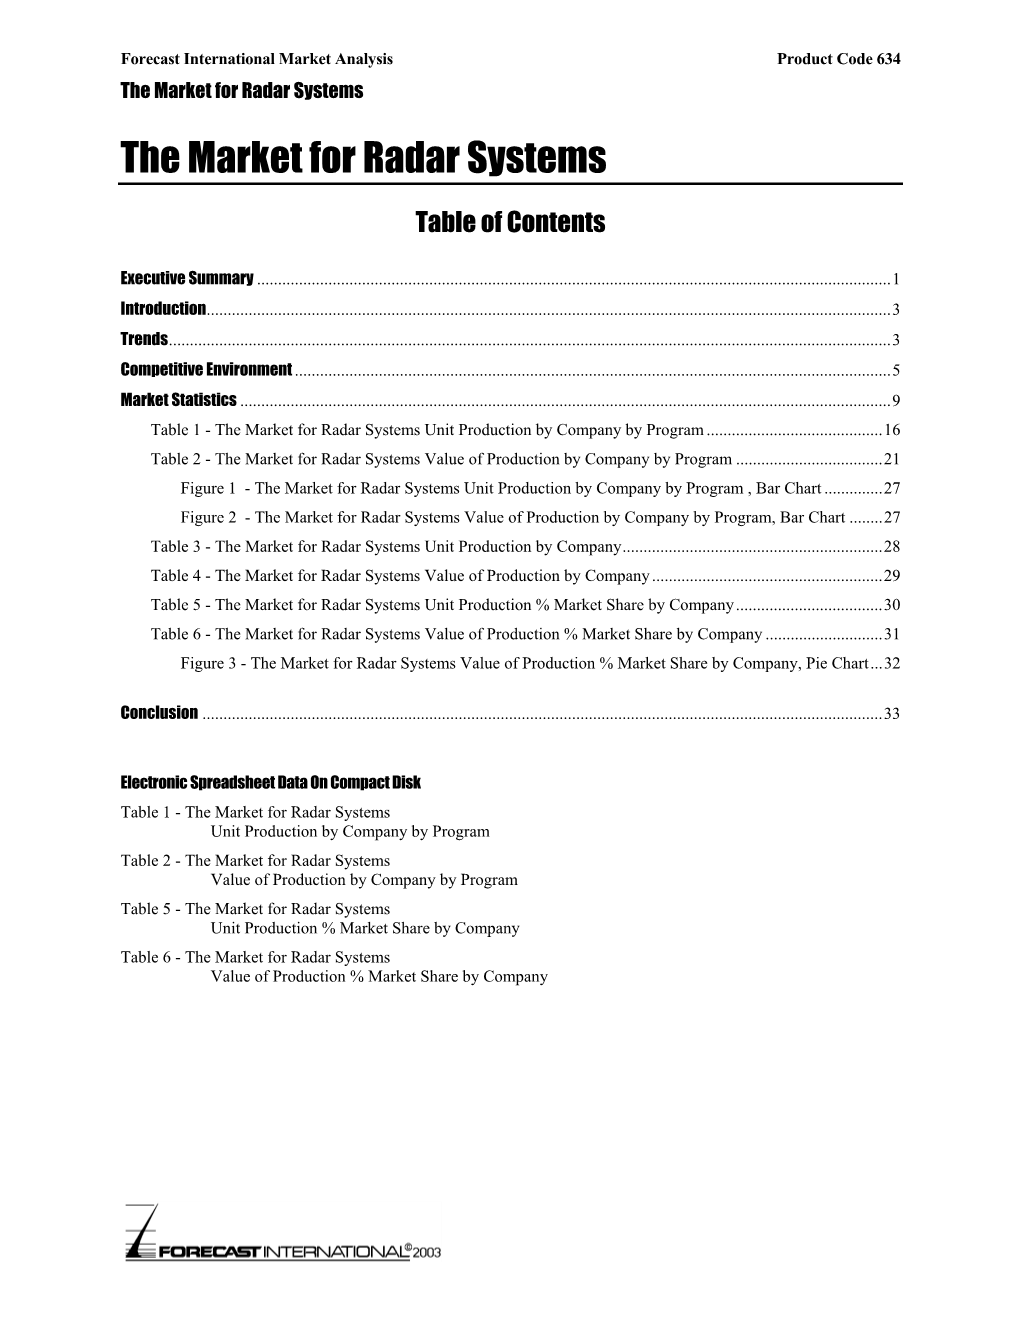 The Market for Radar Systems the Market for Radar Systems